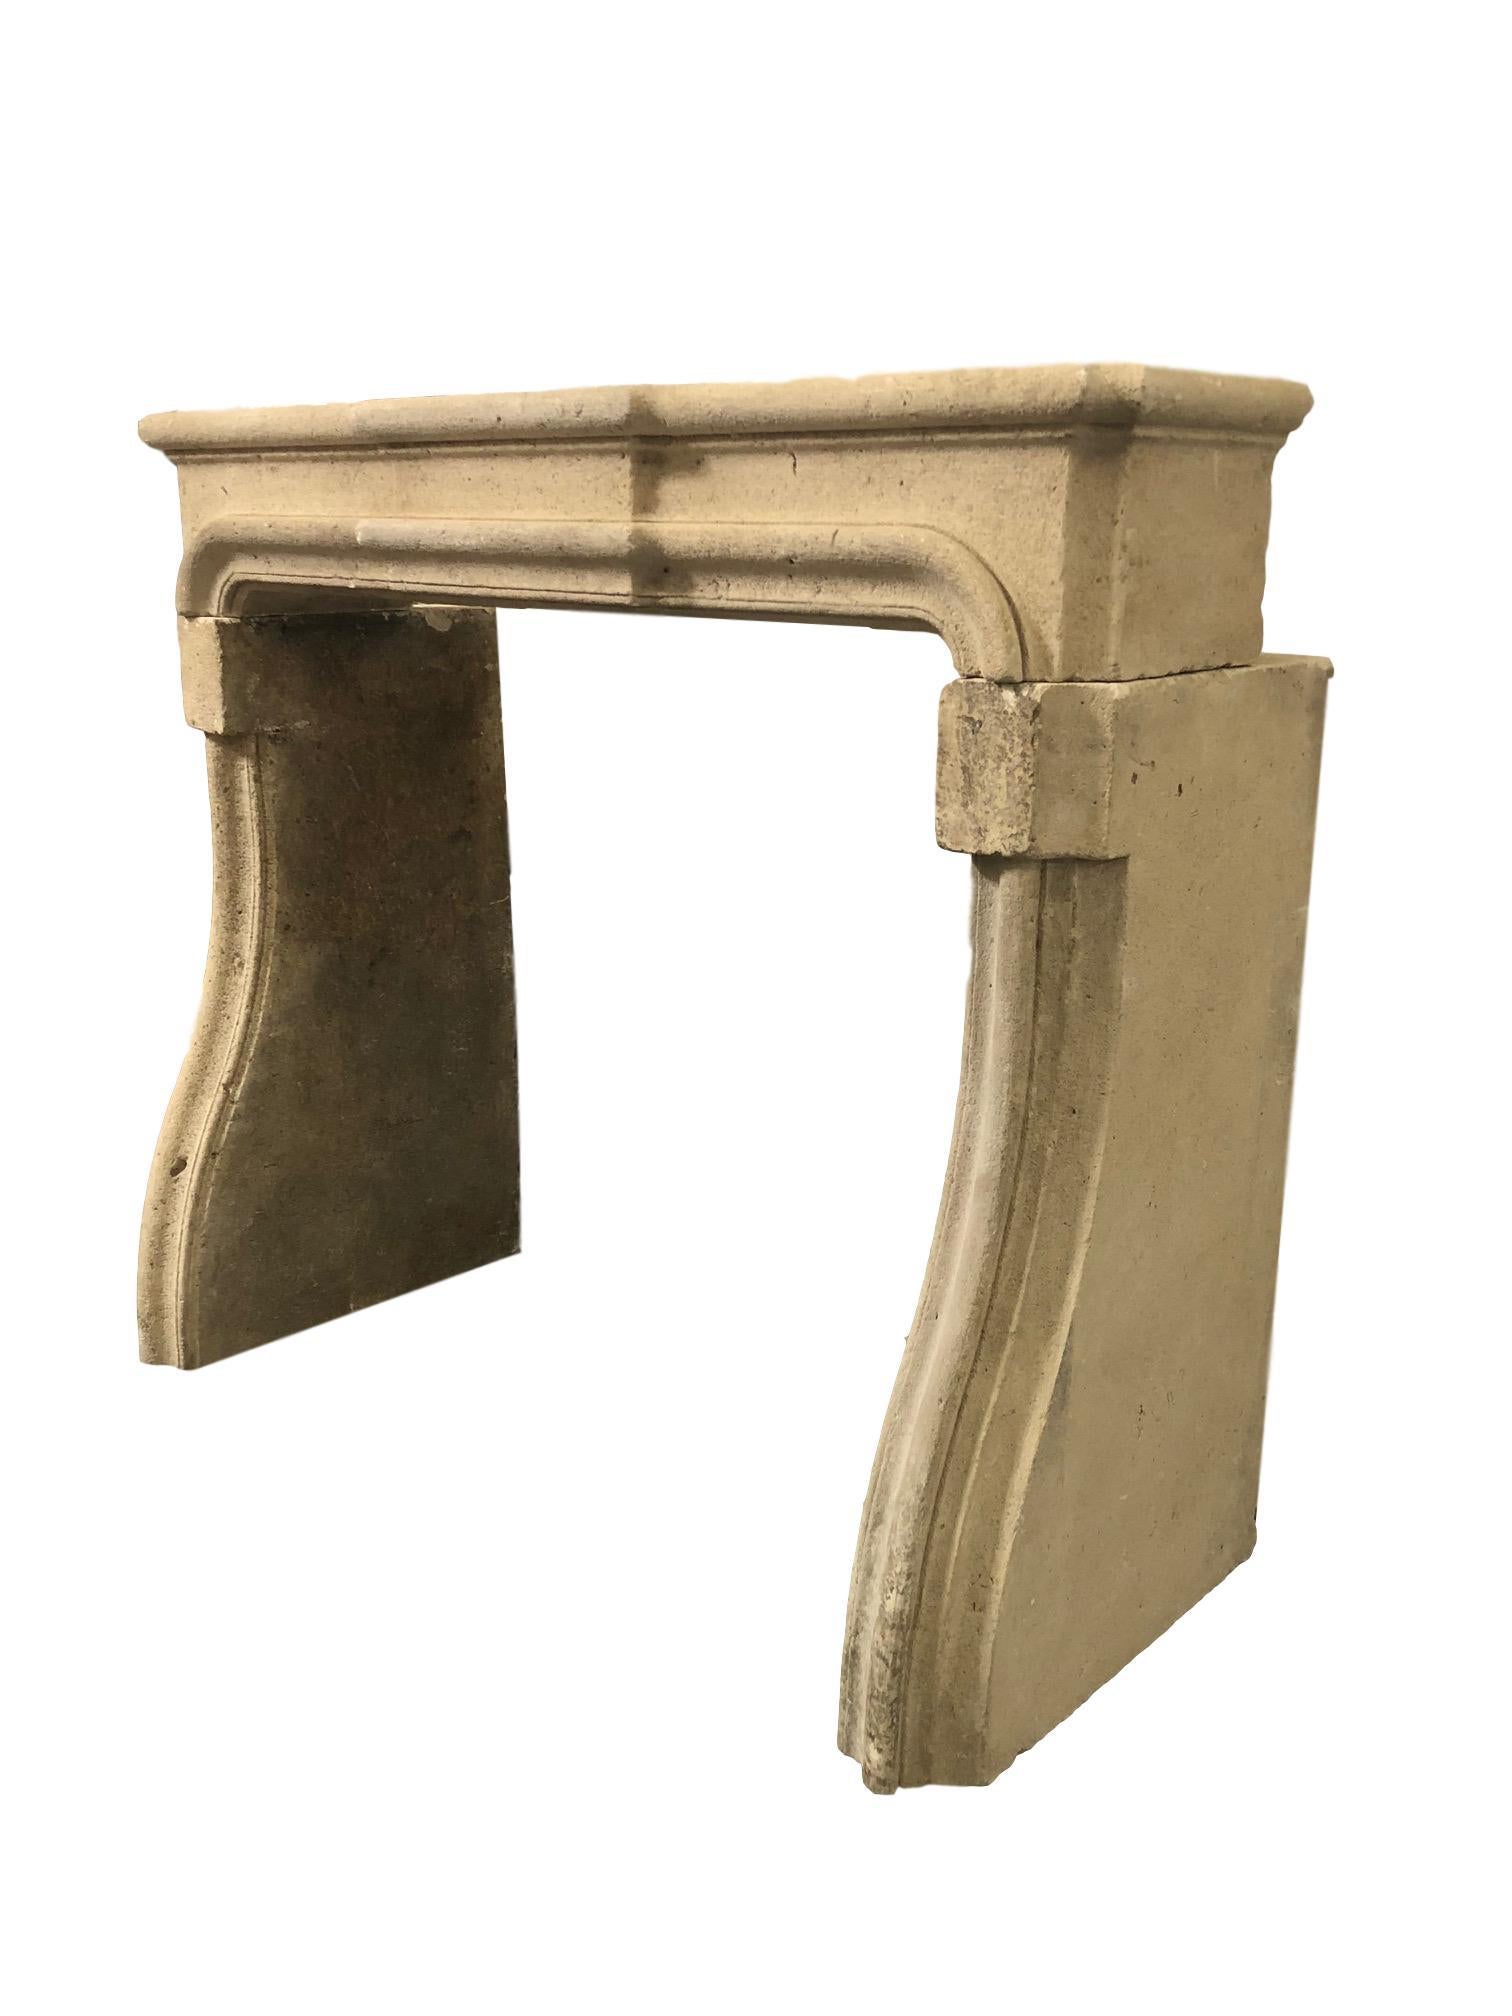 Louis XIV style carved limestone fireplace mantel created by hand and perfectly distressed to create great age. The natural lines and neutral tones allow this piece to work in a variety of spaces from living rooms, bedrooms, loggias and more.